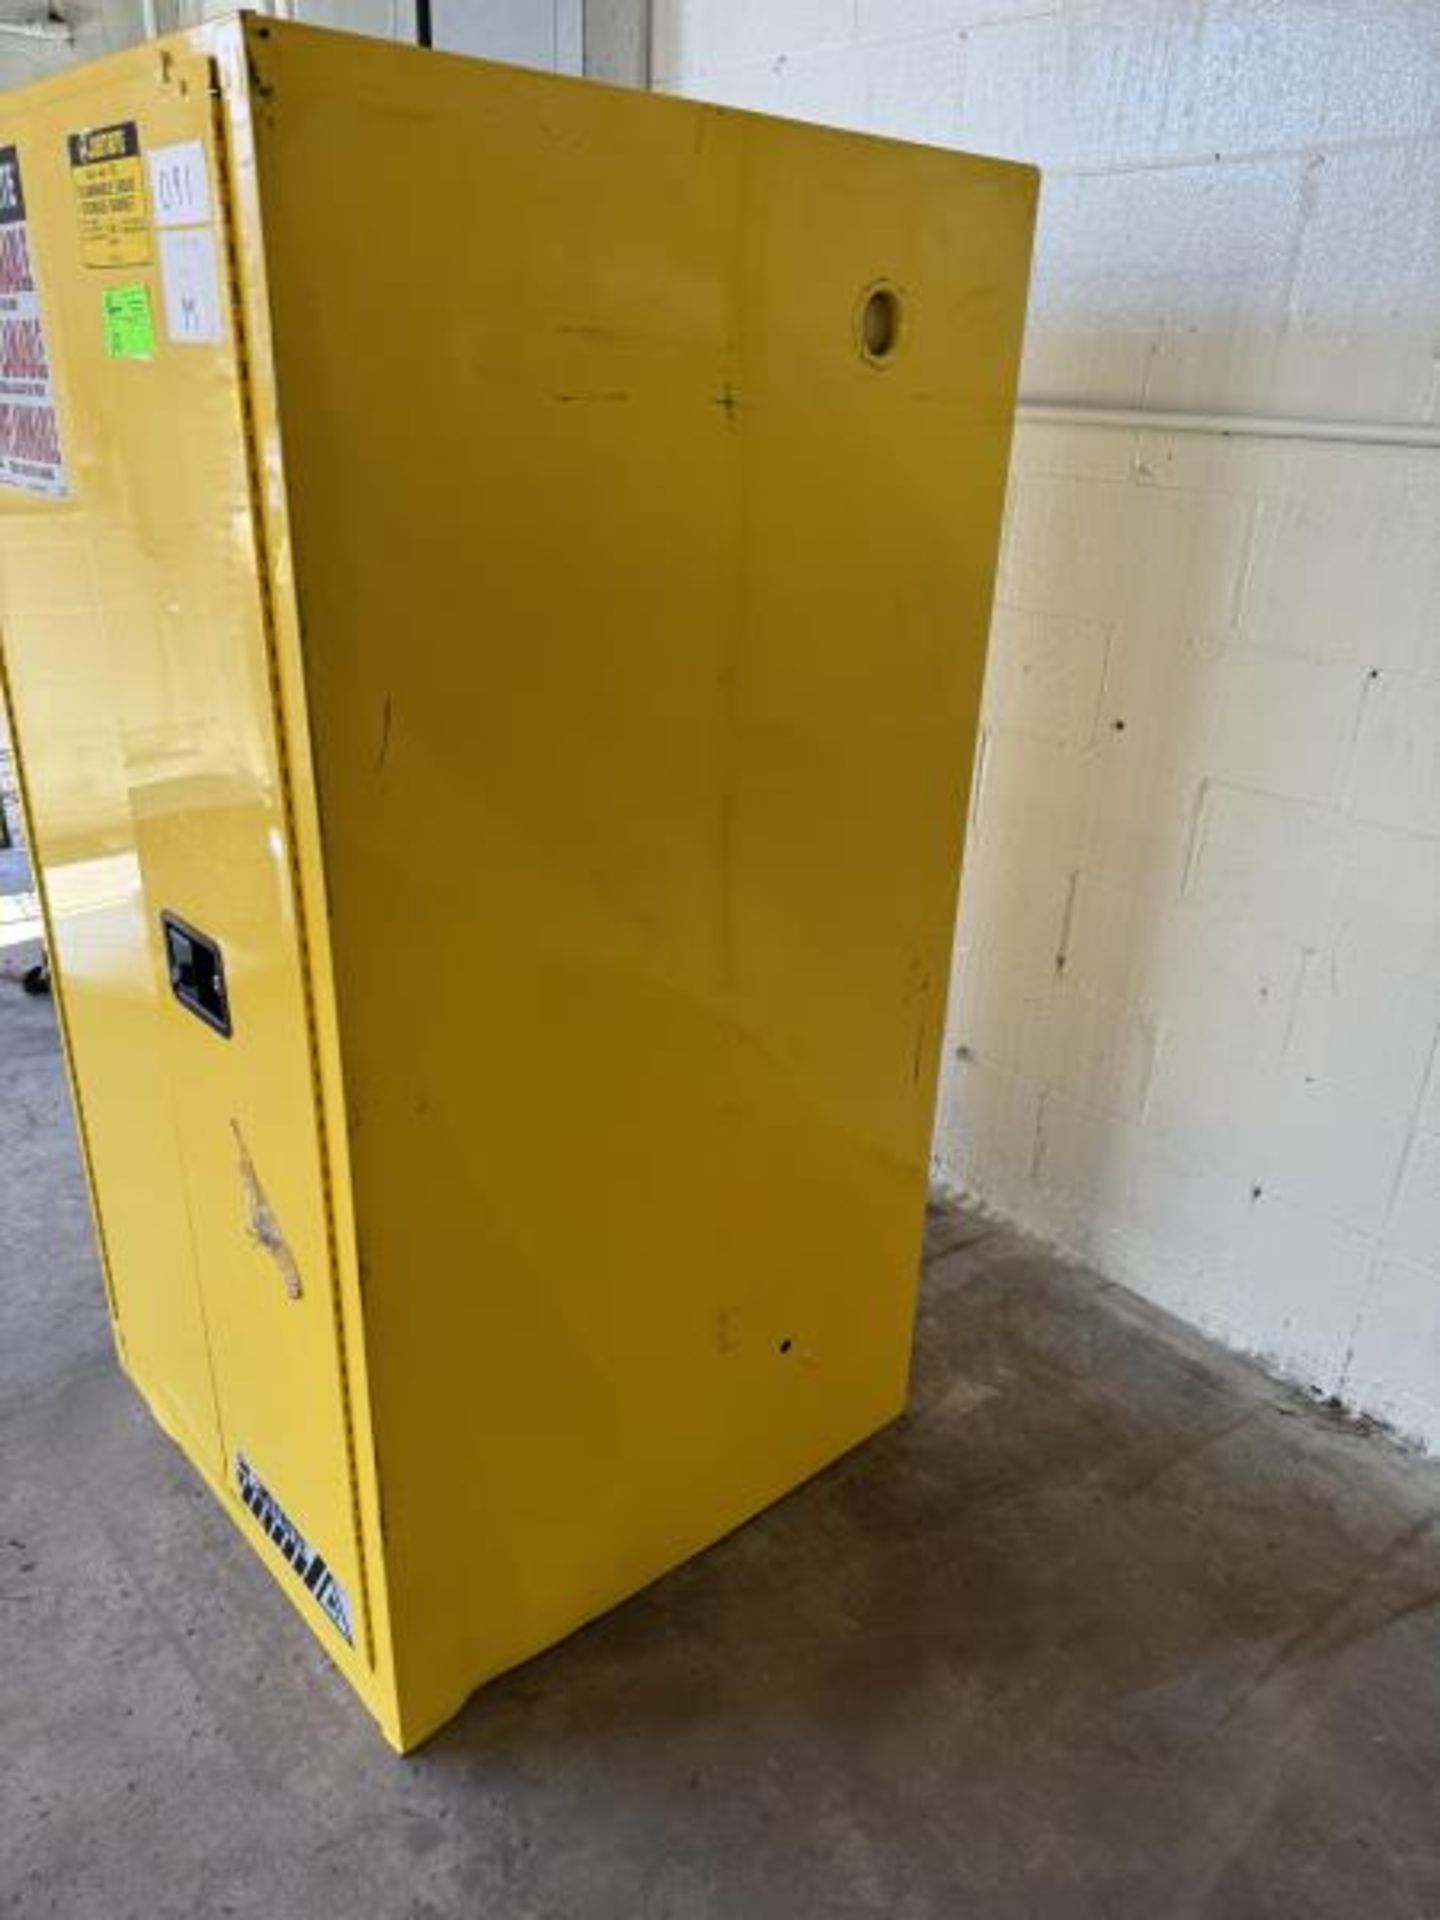 Justrite Flammable Liquid Storage Cabinet 34" Wide x 34" Deep x 66" Tall - Image 3 of 7